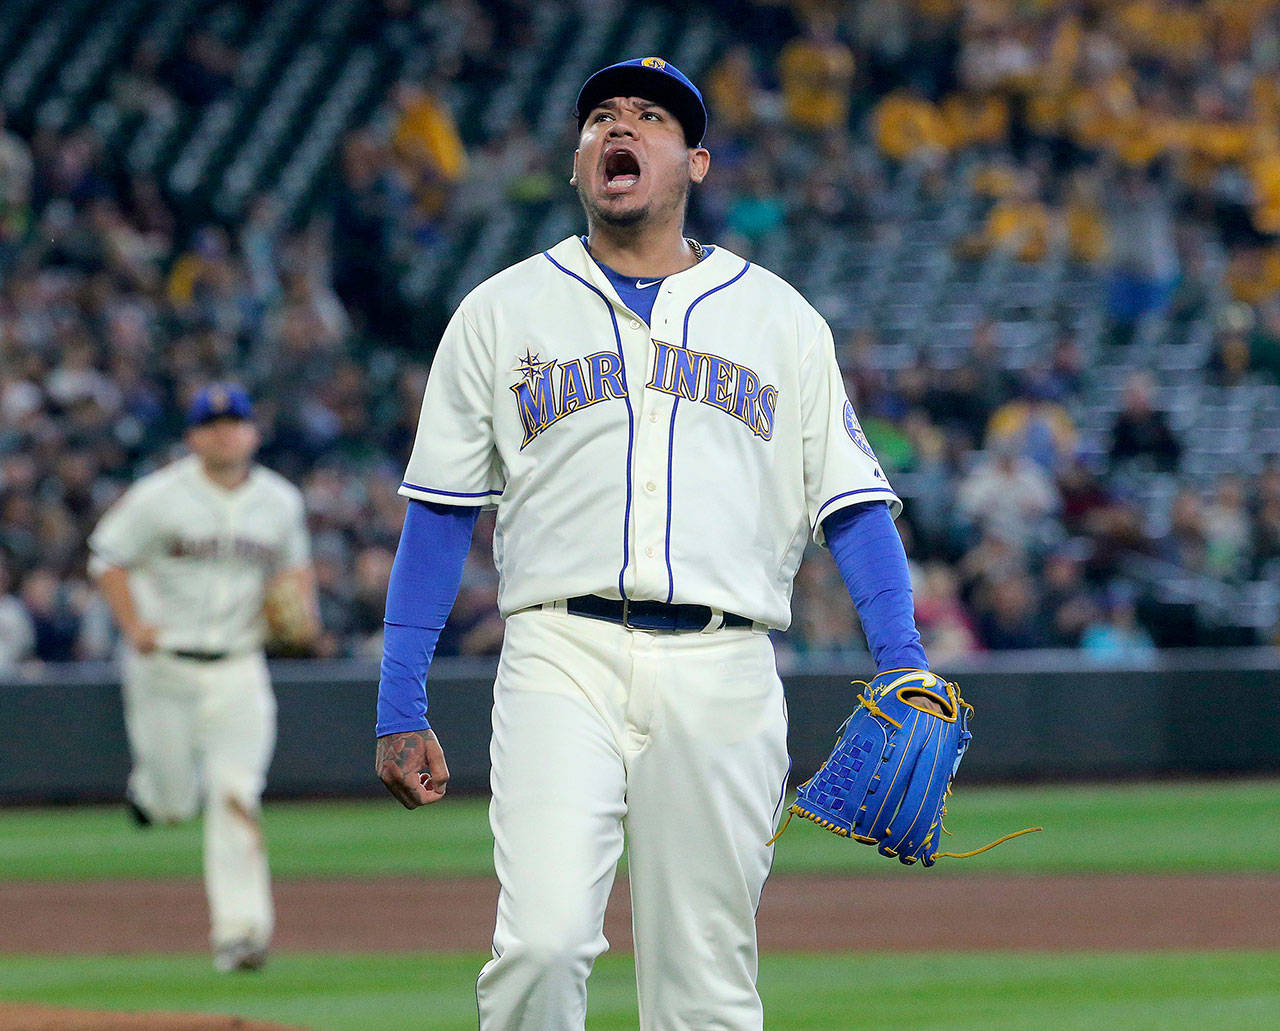 Seattle Mariners pitcher Felix Hernandez, seen here in a file photo, was removed from the starting rotation after allowing seven earned runs, including three homers, in six innings pitched against the Texas Rangers on Thursday. (Ken Lambert/Seattle Times/TNS)